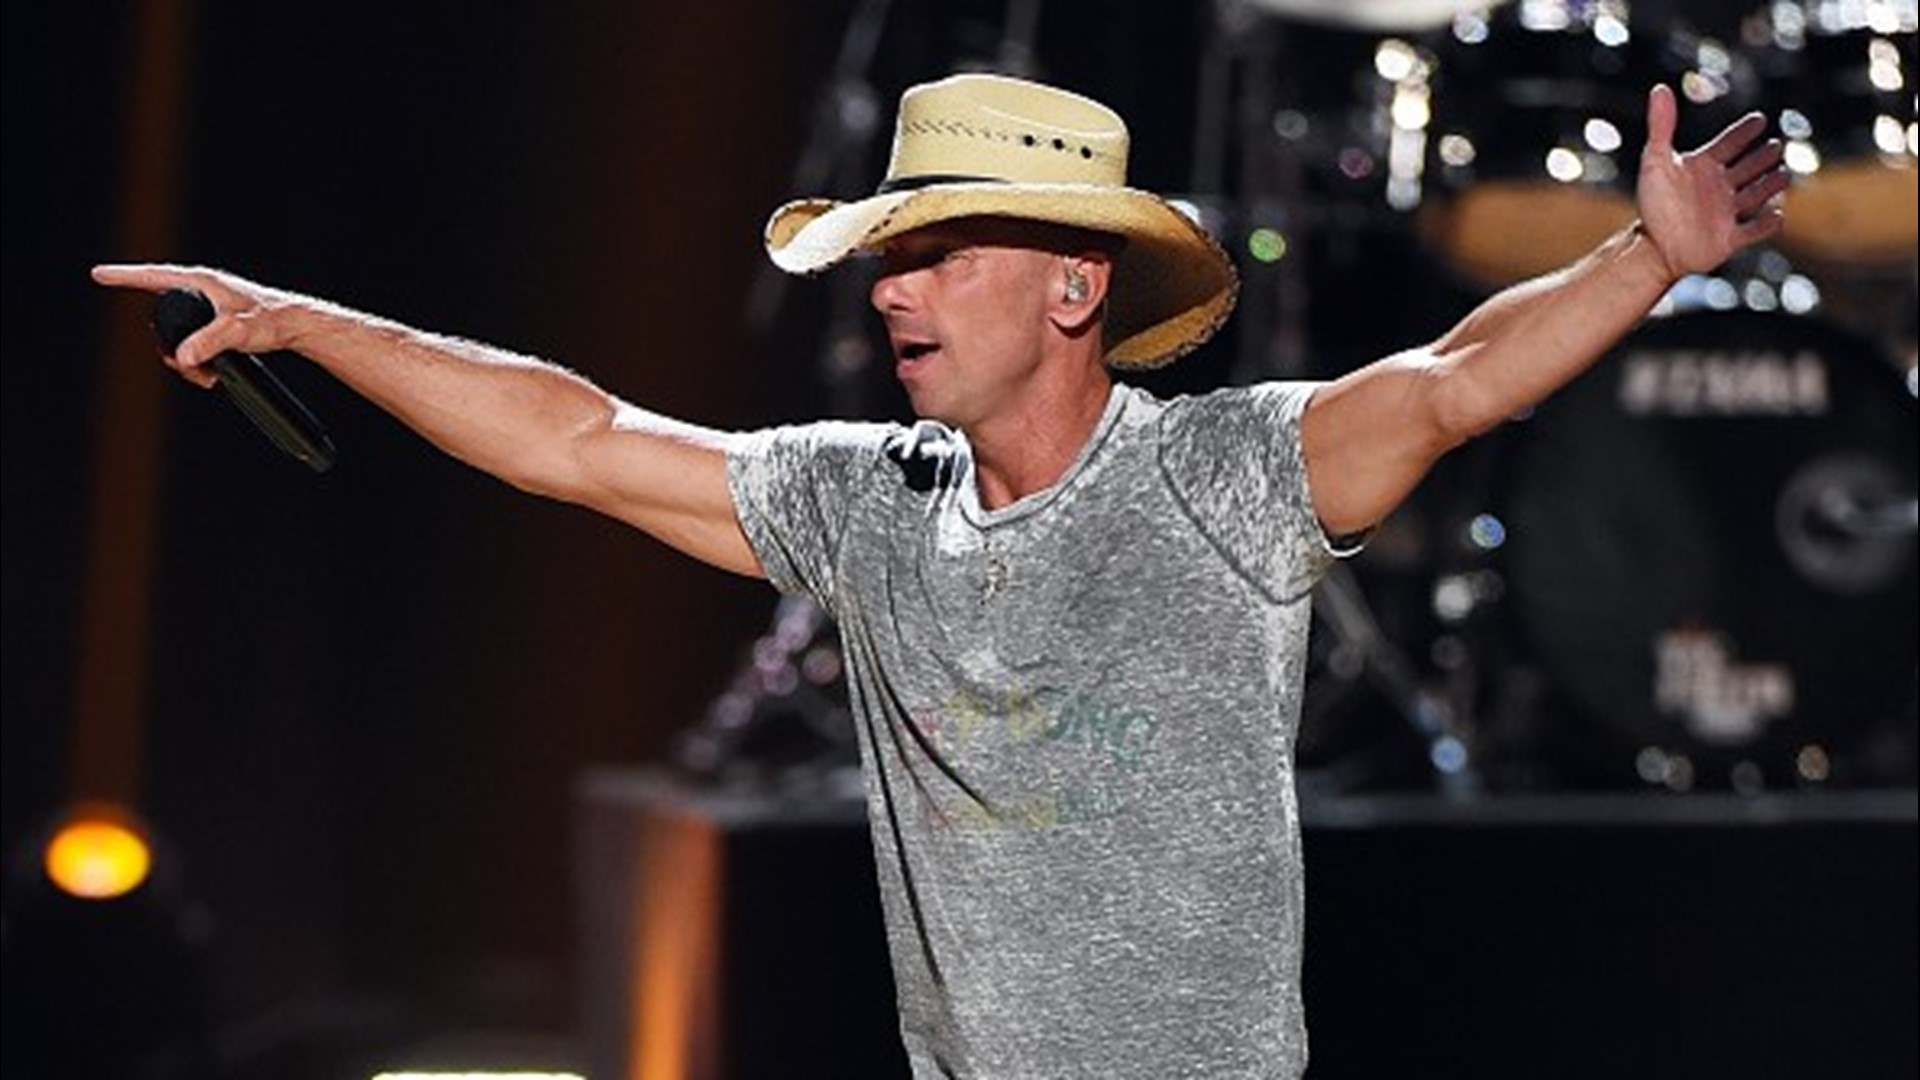 Kenny Chesney Coming To Greensboro April 12 For 'Songs For The Saints